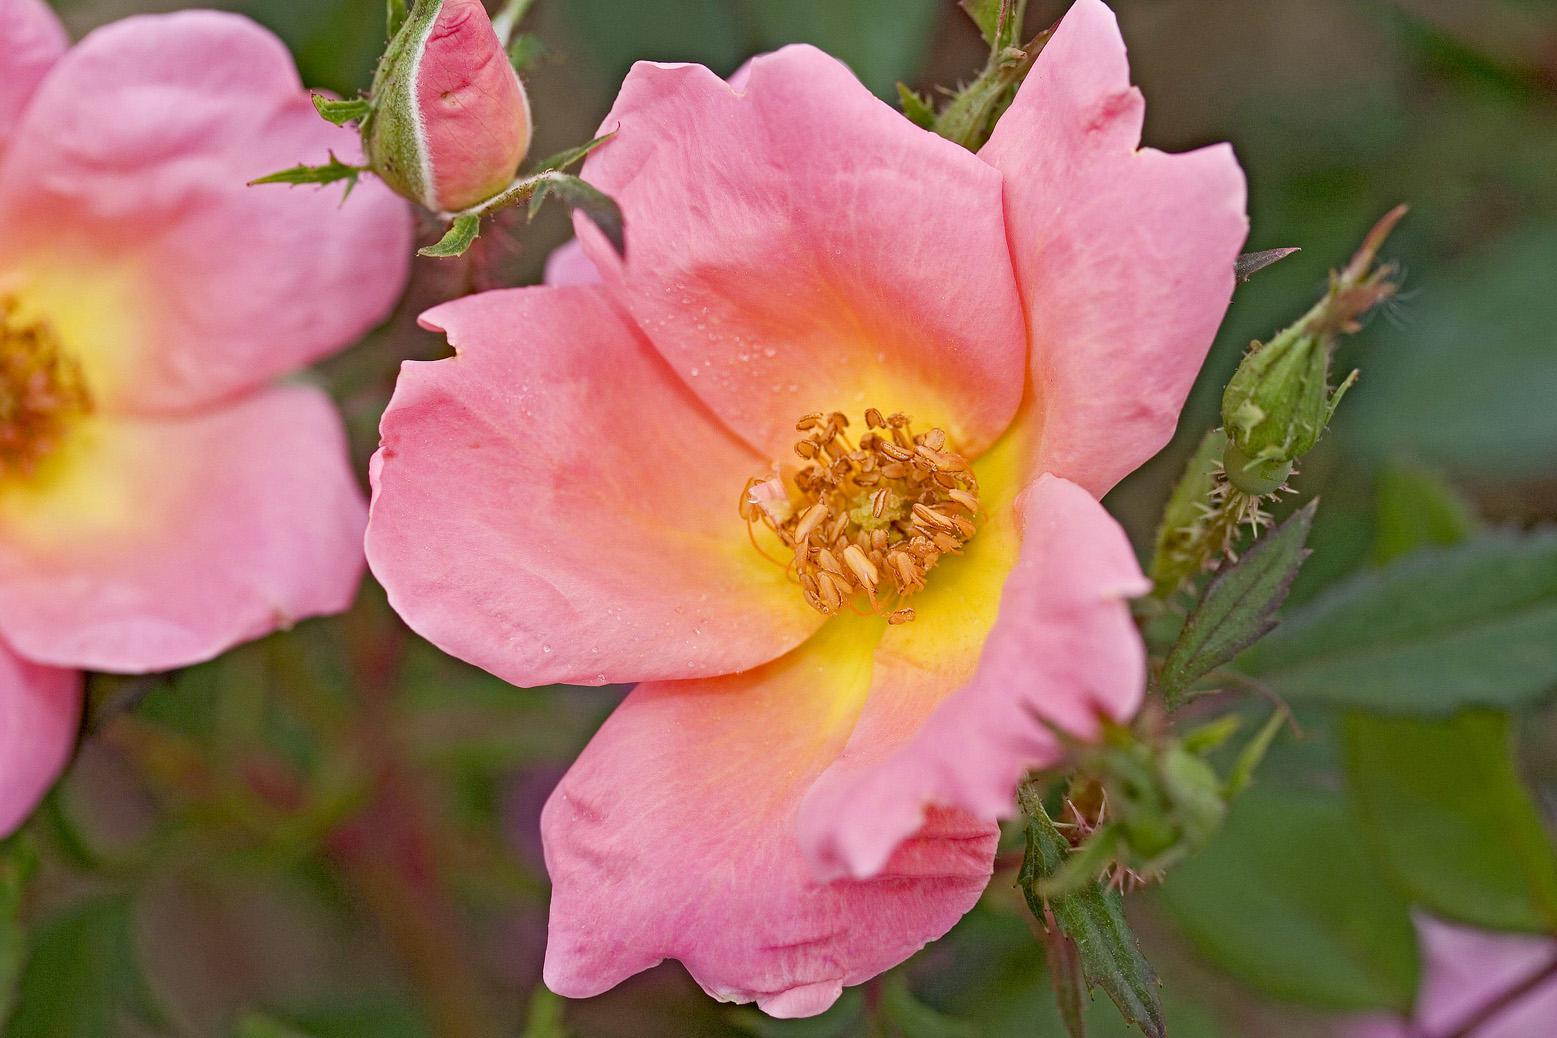 Rainbow Knock Out is a compact landscape shrub rose that produces abundant single-form flowers throughout the growing season. The delicate, five-petaled flowers are a deep coral-pink color with a yellow center finishing nicely to light coral.